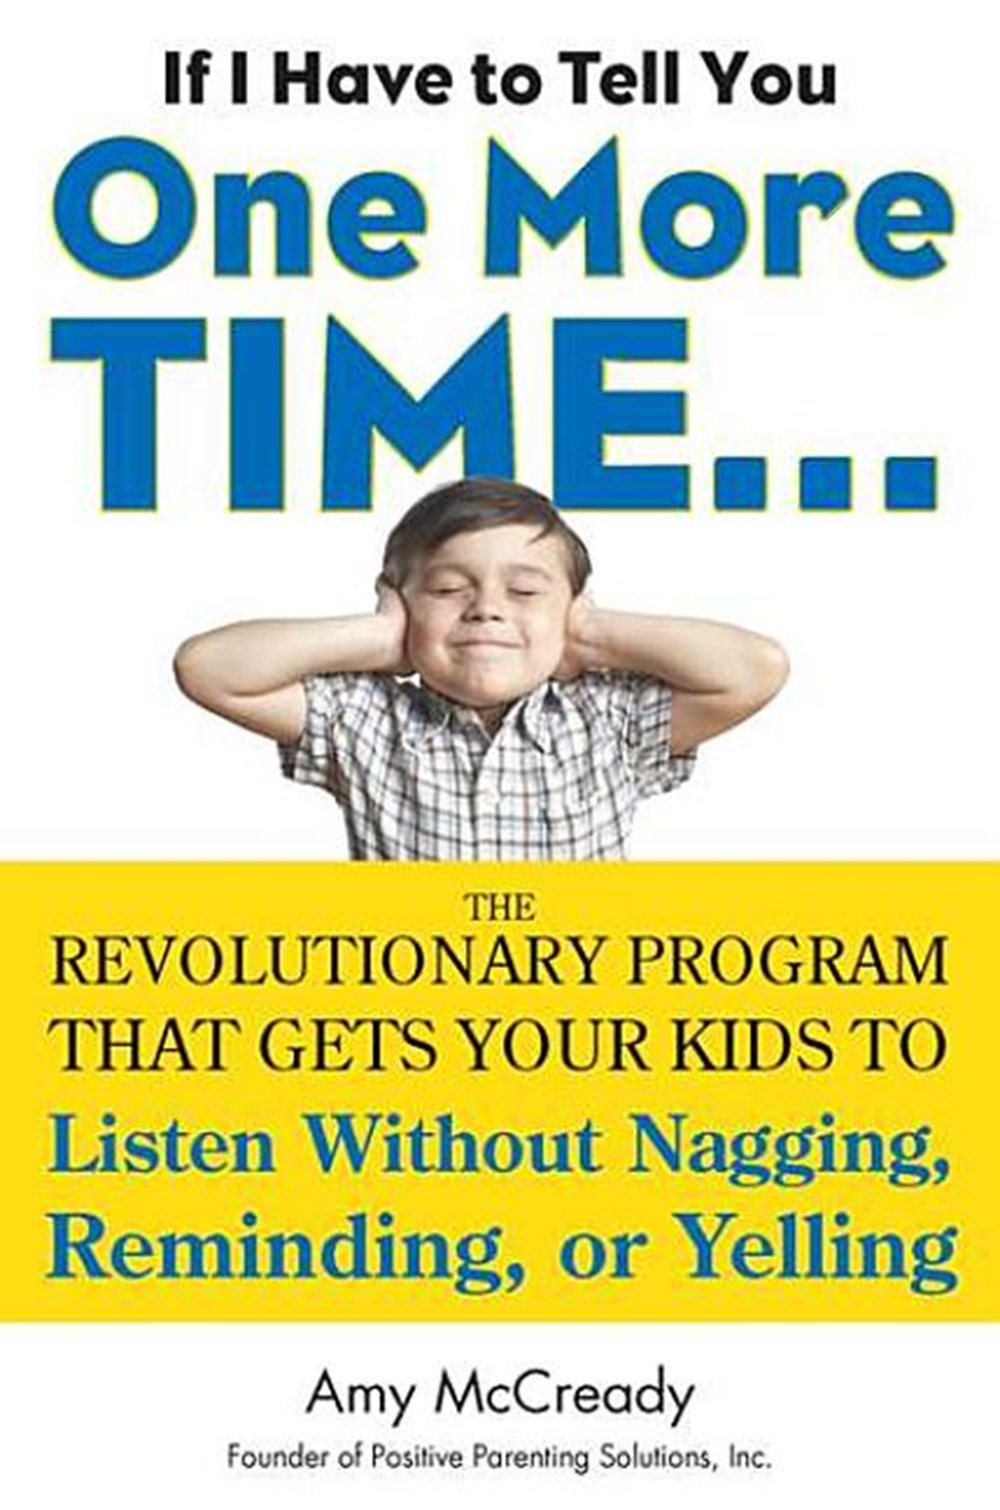 If I Have to Tell You One More Time...: The Revolutionary Program That Gets Your Kids to Listen With